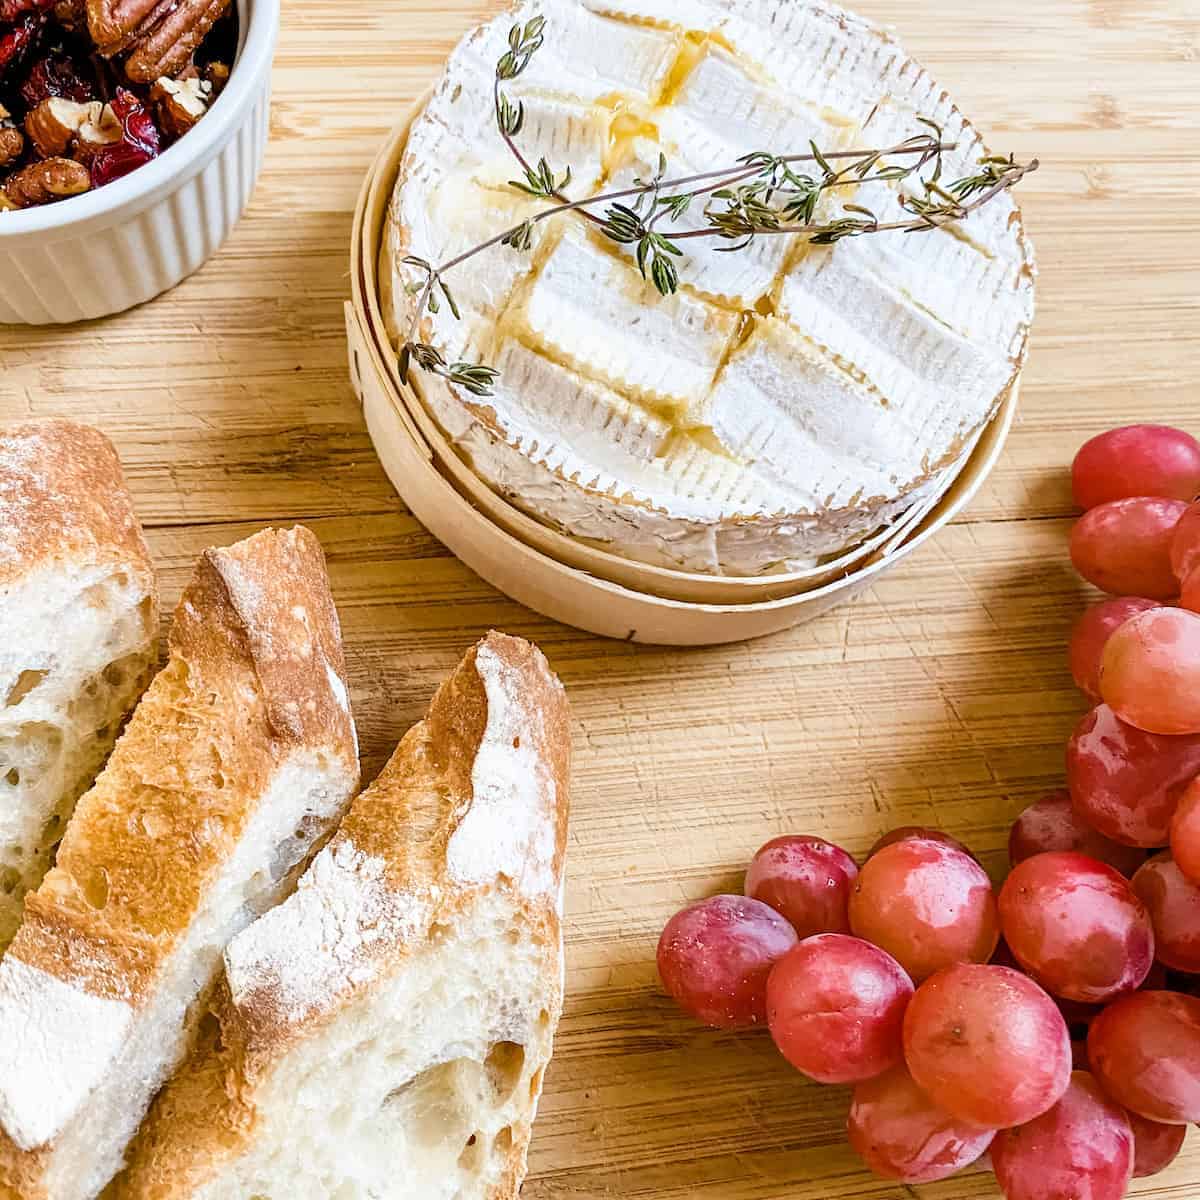 A bunch of grapes with Camembert.